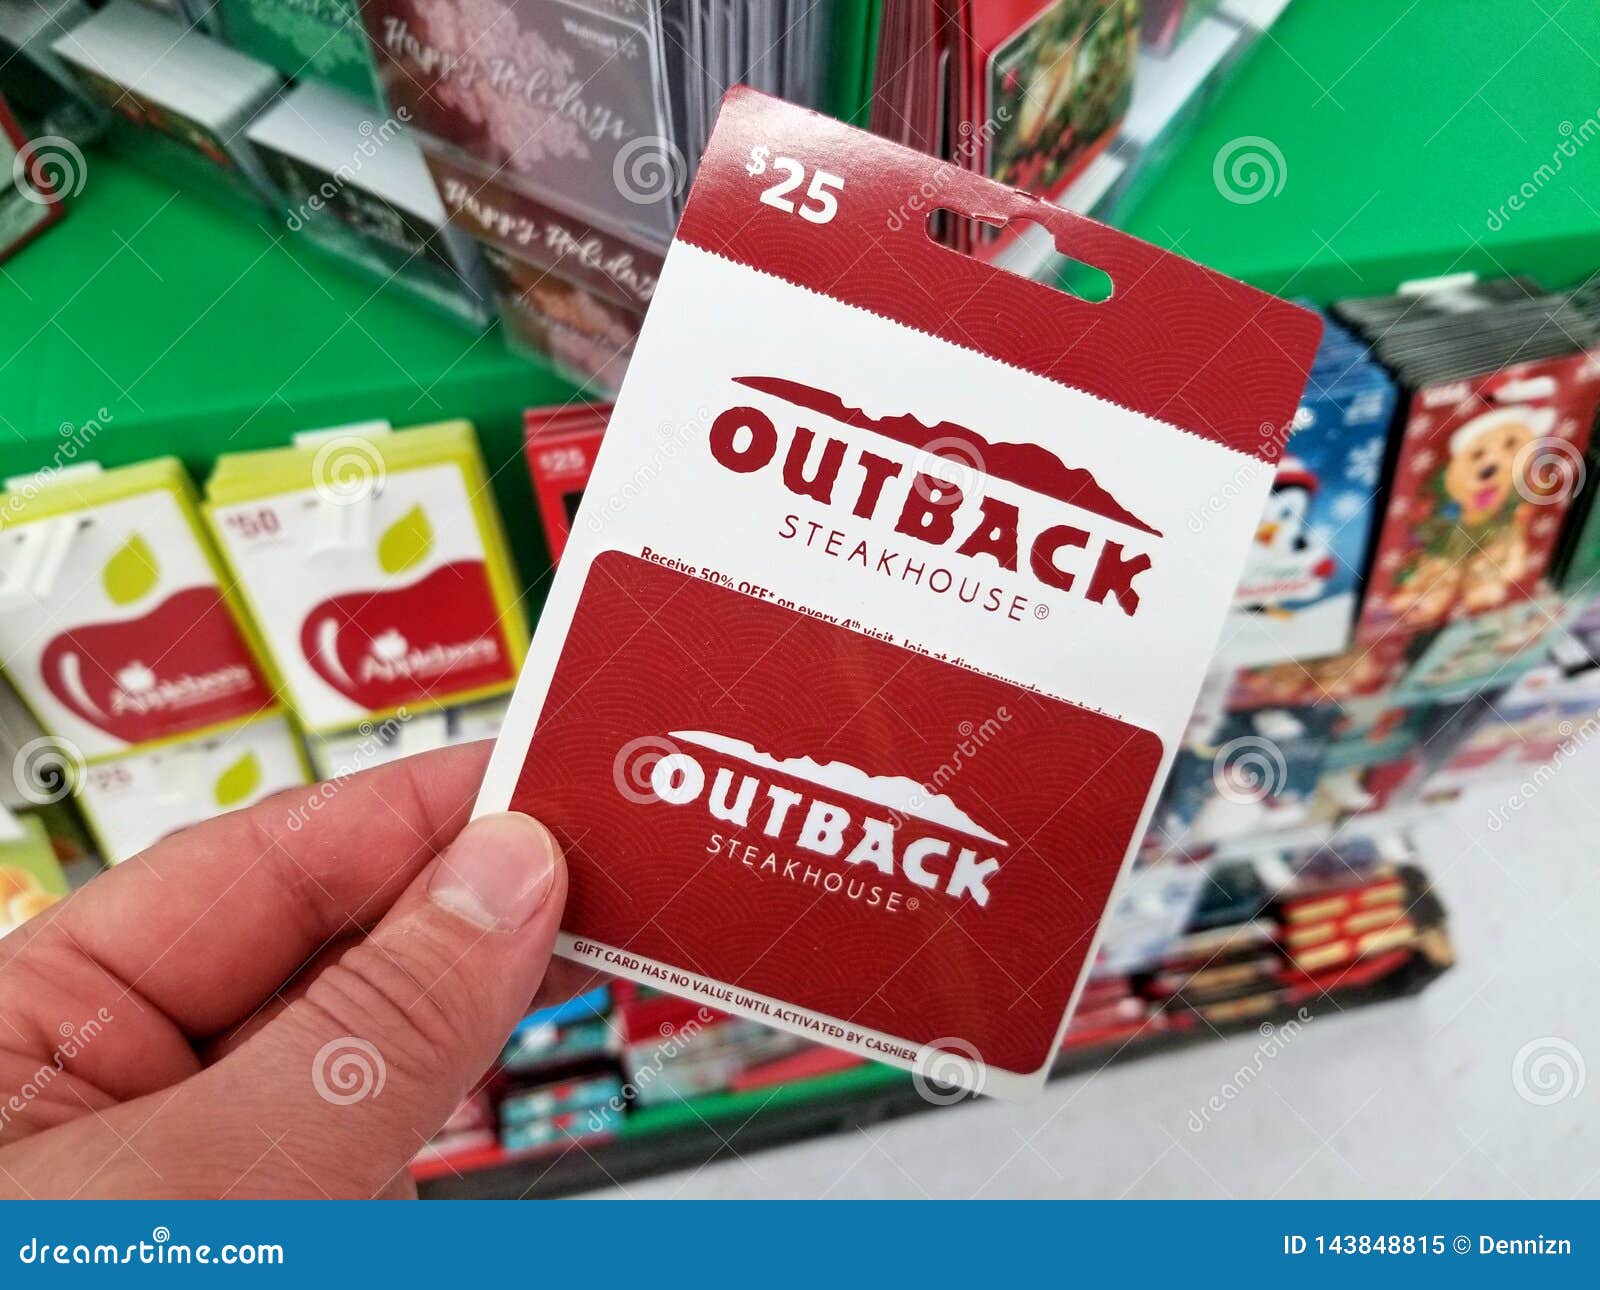 Outback Gift Card Outback steakhouse gift card Gift